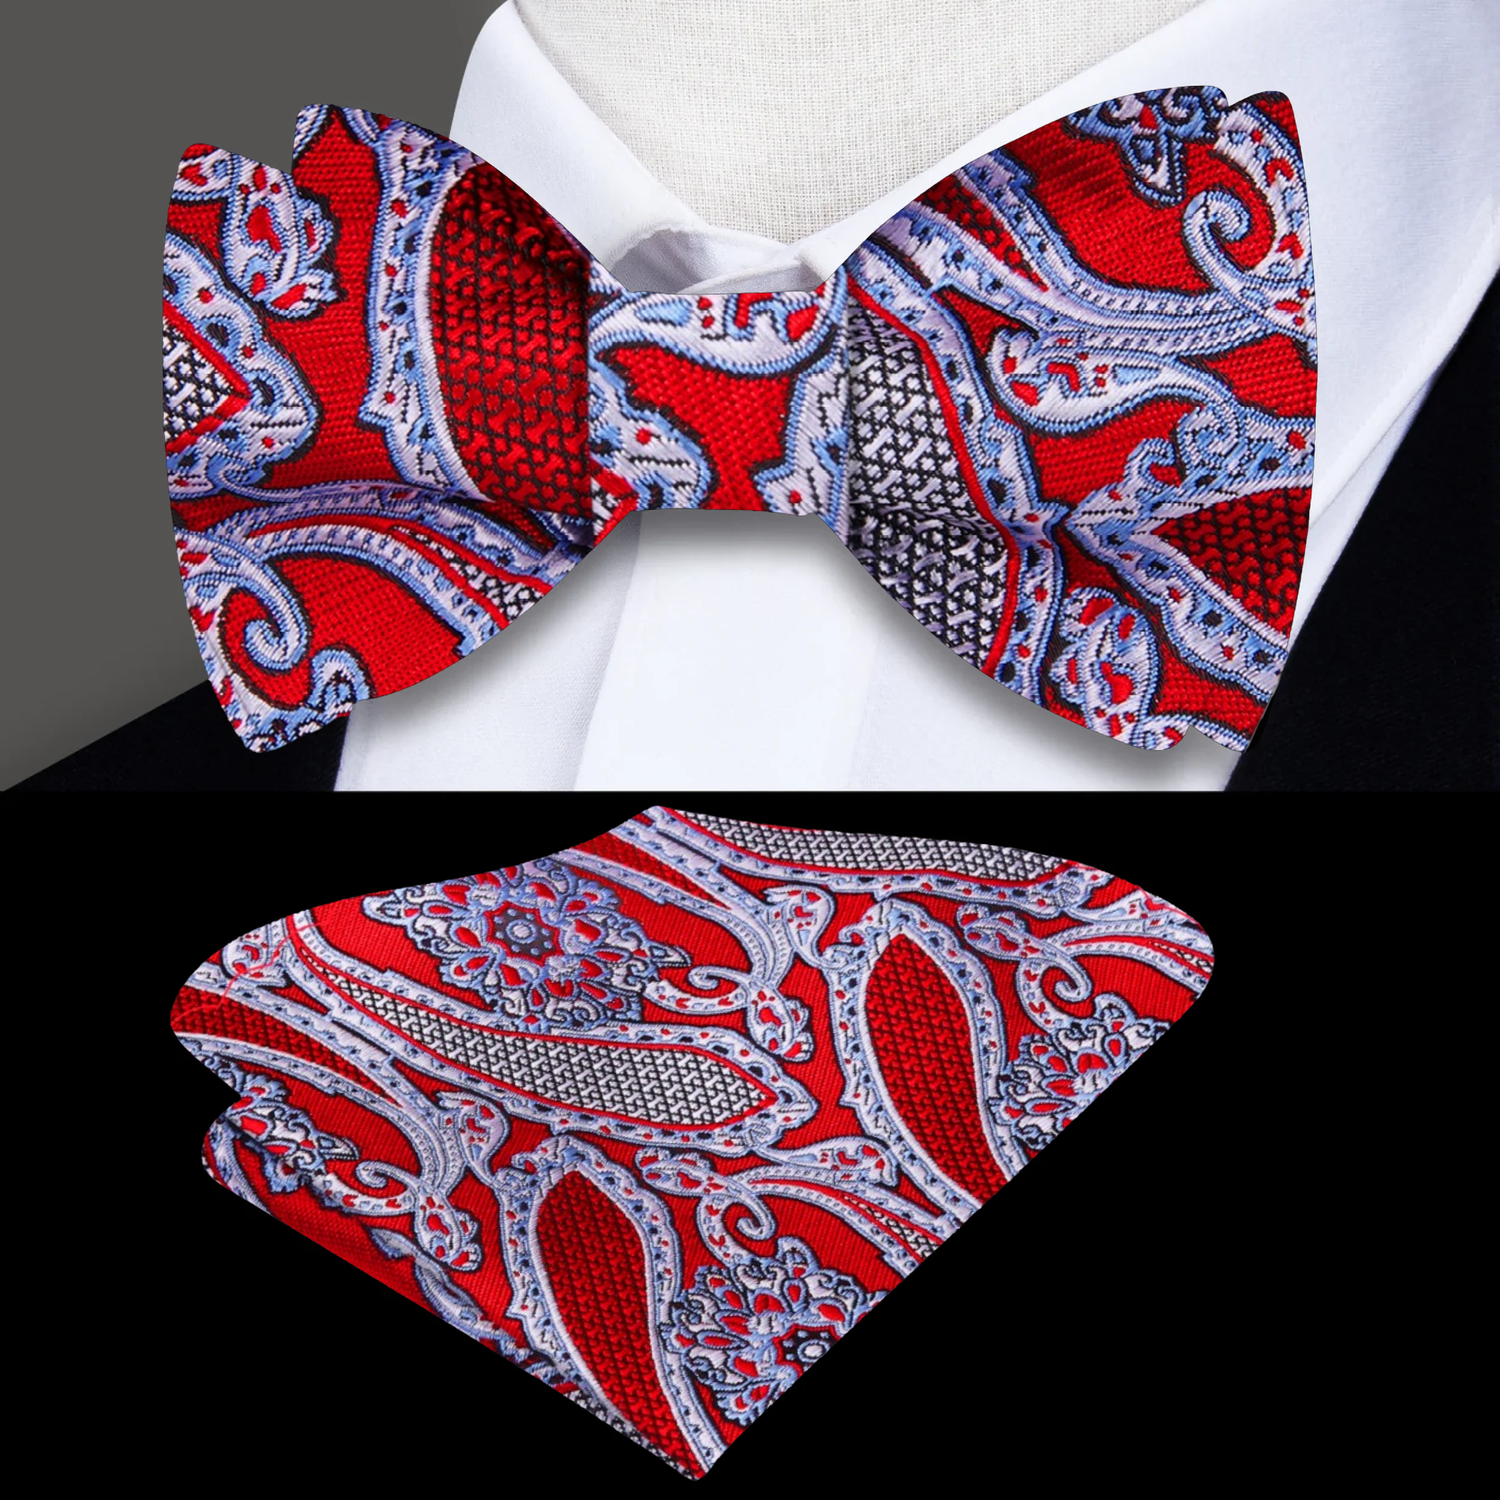 A Red, Black, White Detailed Paisley Pattern Silk Self Tie Bow Tie, Matching Pocket Square